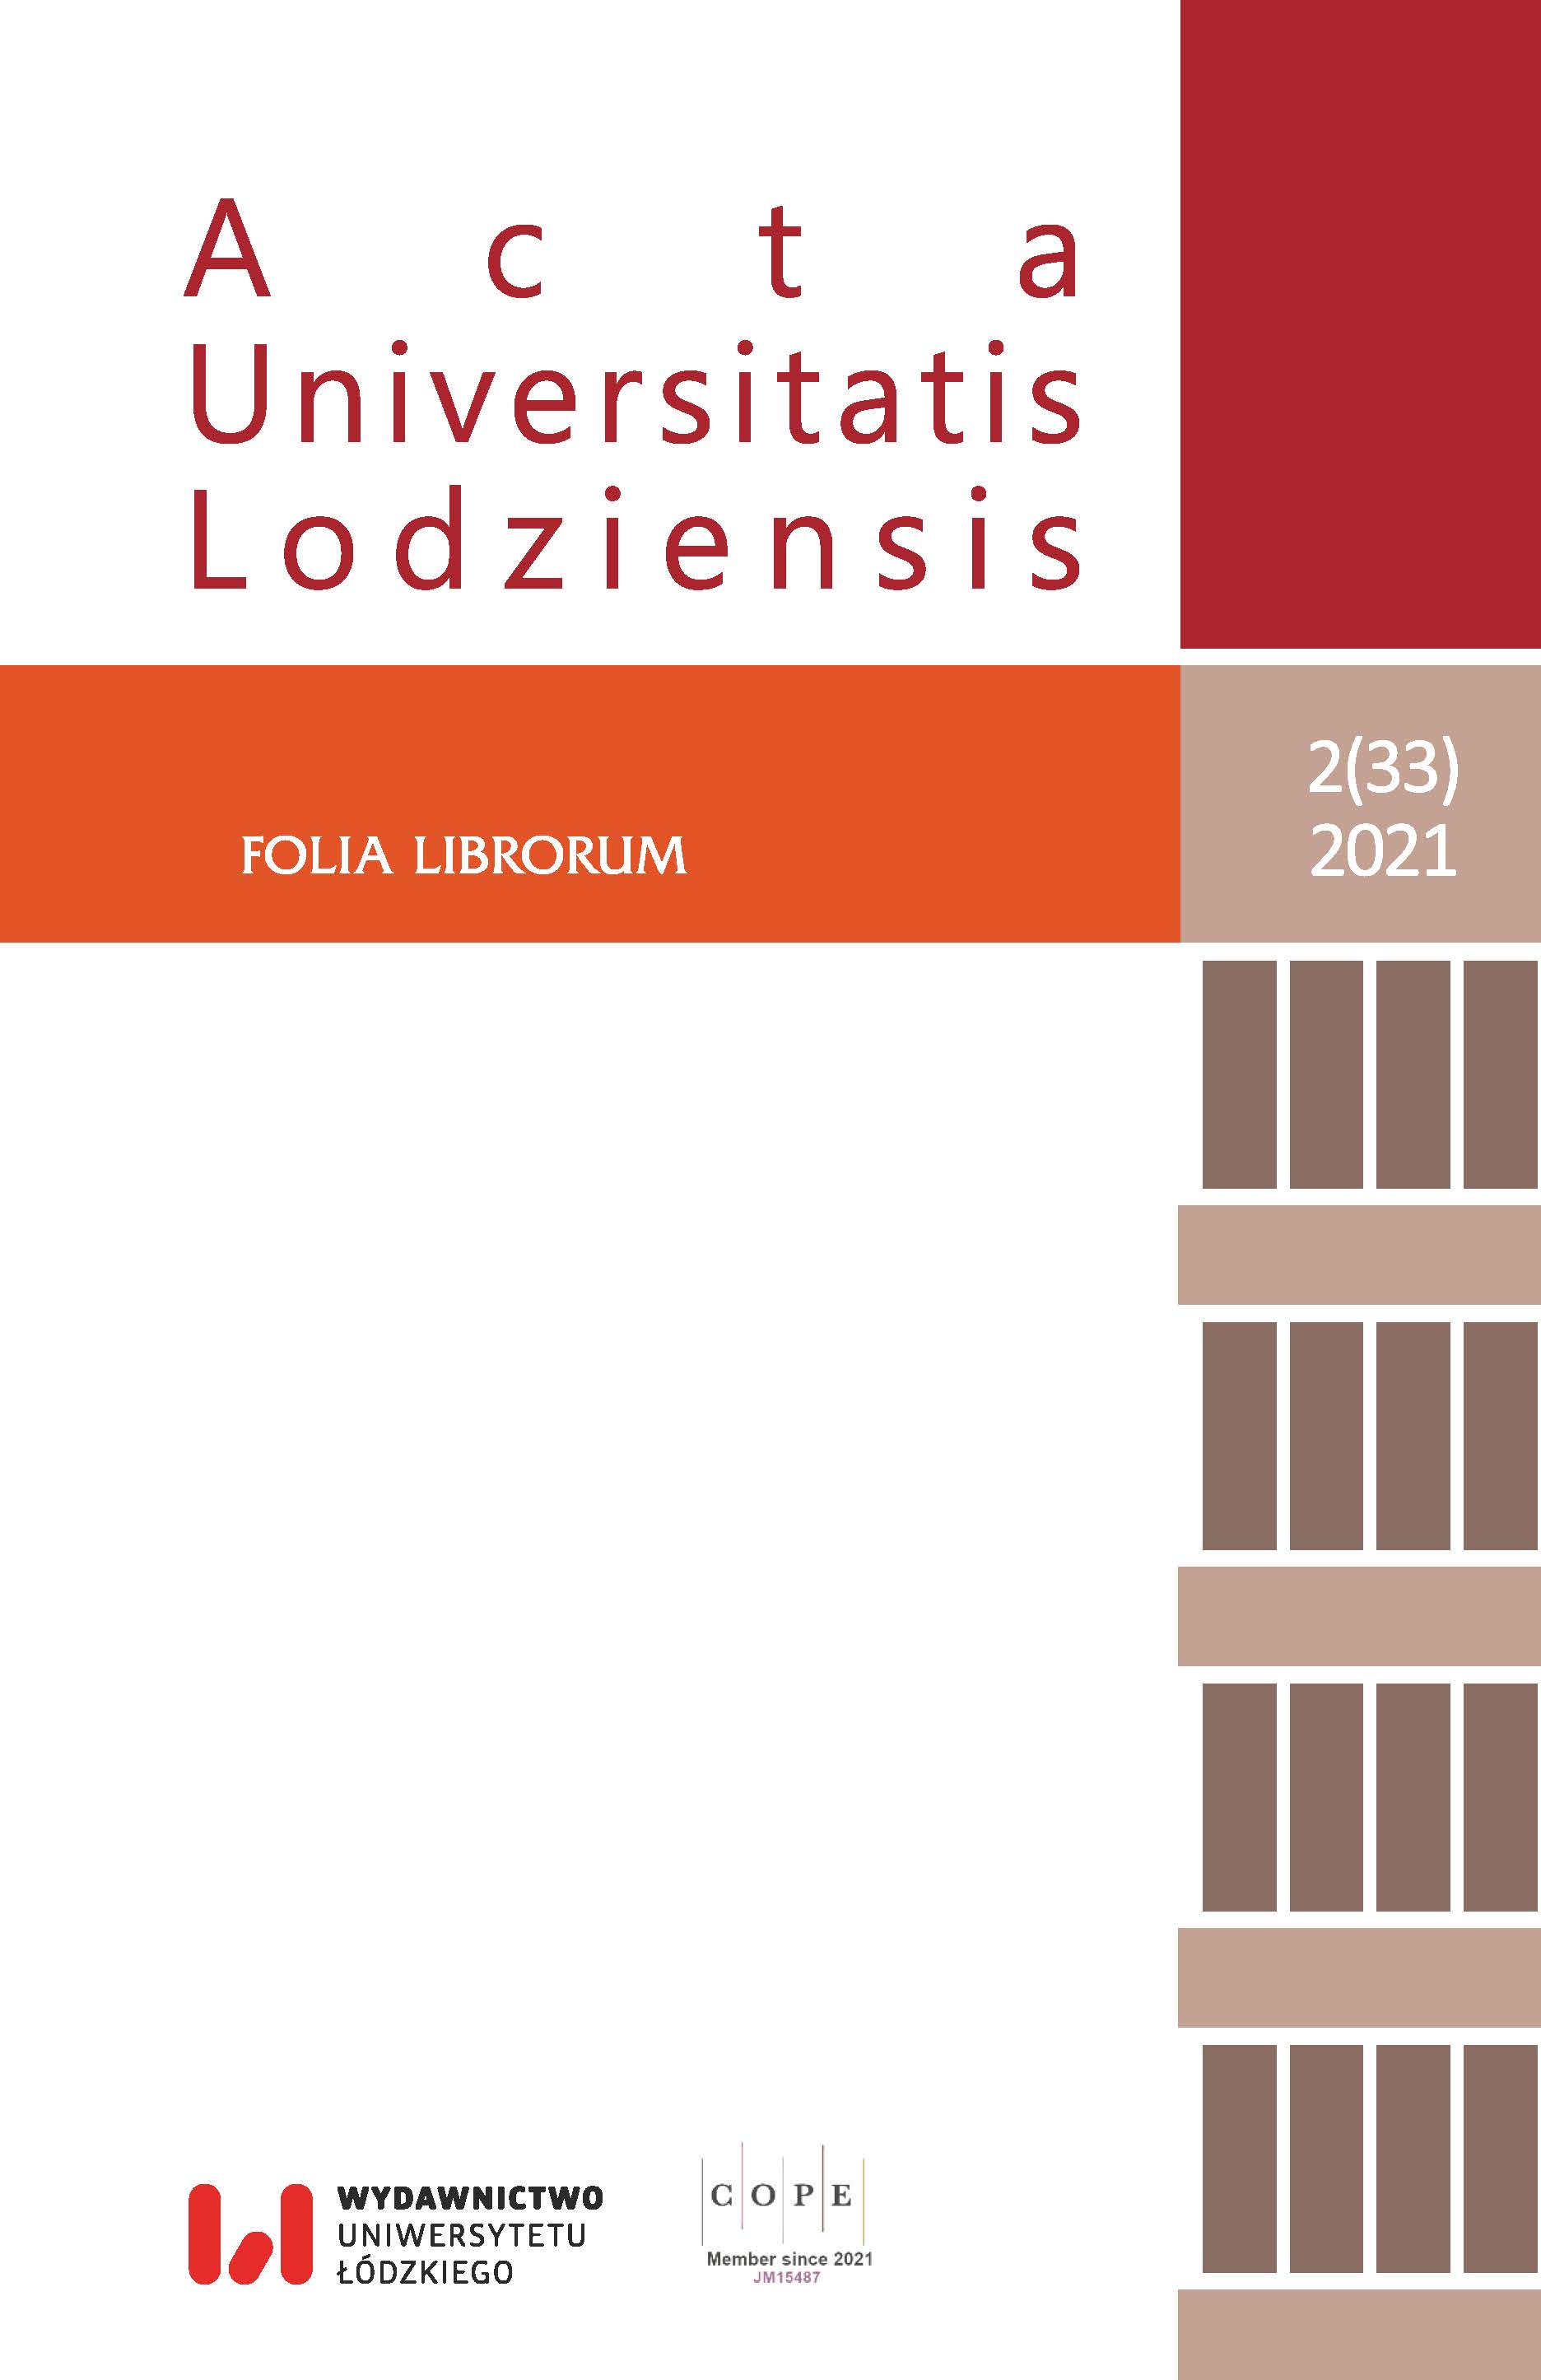 The activities of A. Parczewski’s Educational Library in Kalisz during the time of COVID-19 pandemic in the school year 2020/2021 Cover Image